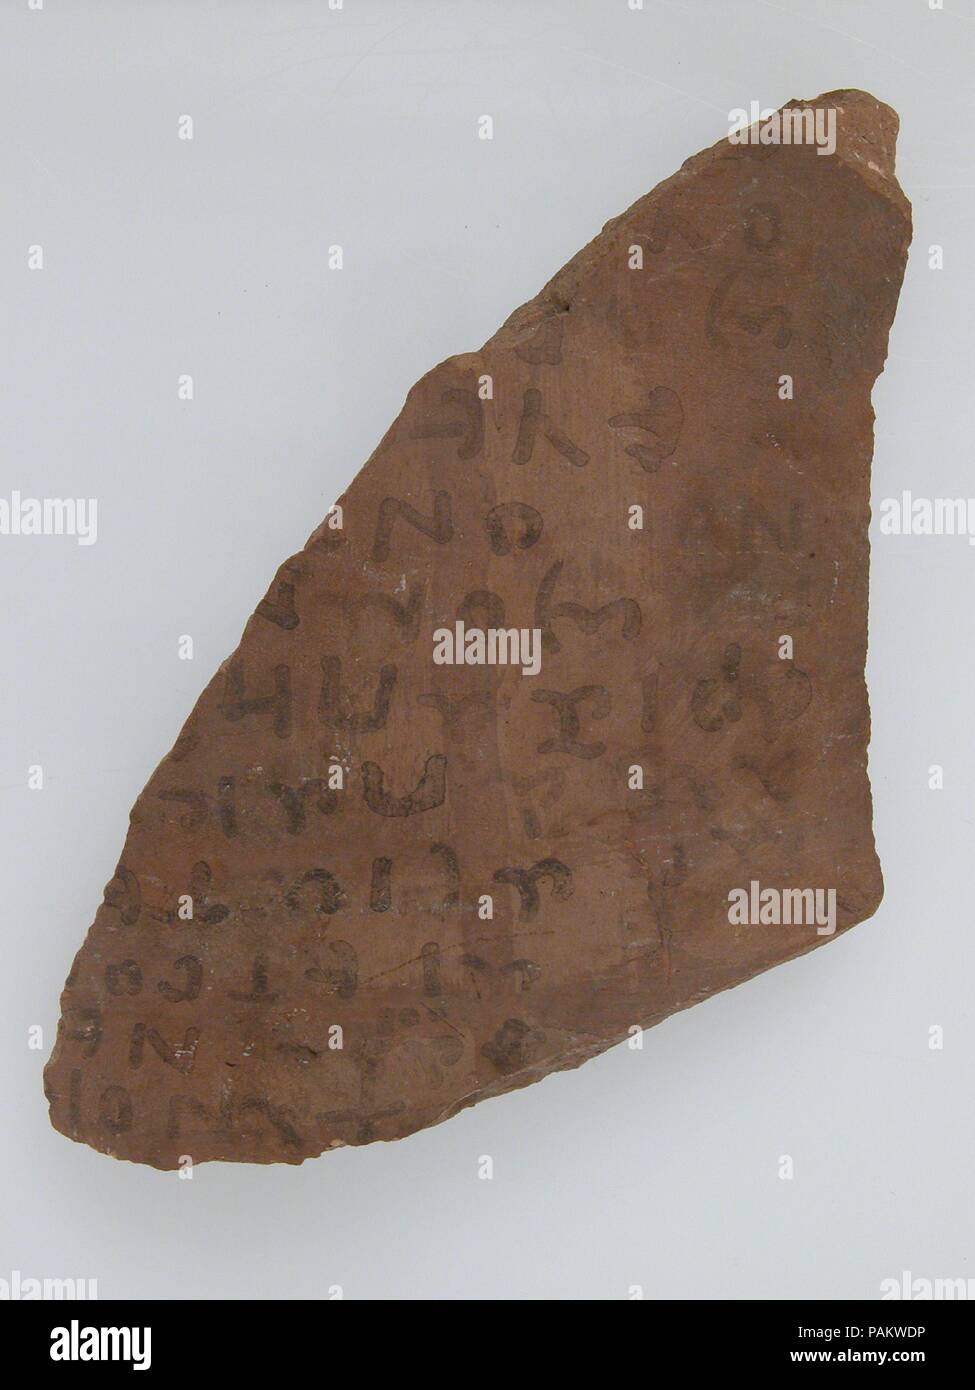 Ostrakon with the Fragments of Two Letter to Apa Cyriacus. Culture: Coptic. Dimensions: 4 7/16 x 4 1/8 in. (11.2 x 10.5 cm). Date: 600. Museum: Metropolitan Museum of Art, New York, USA. Stock Photo